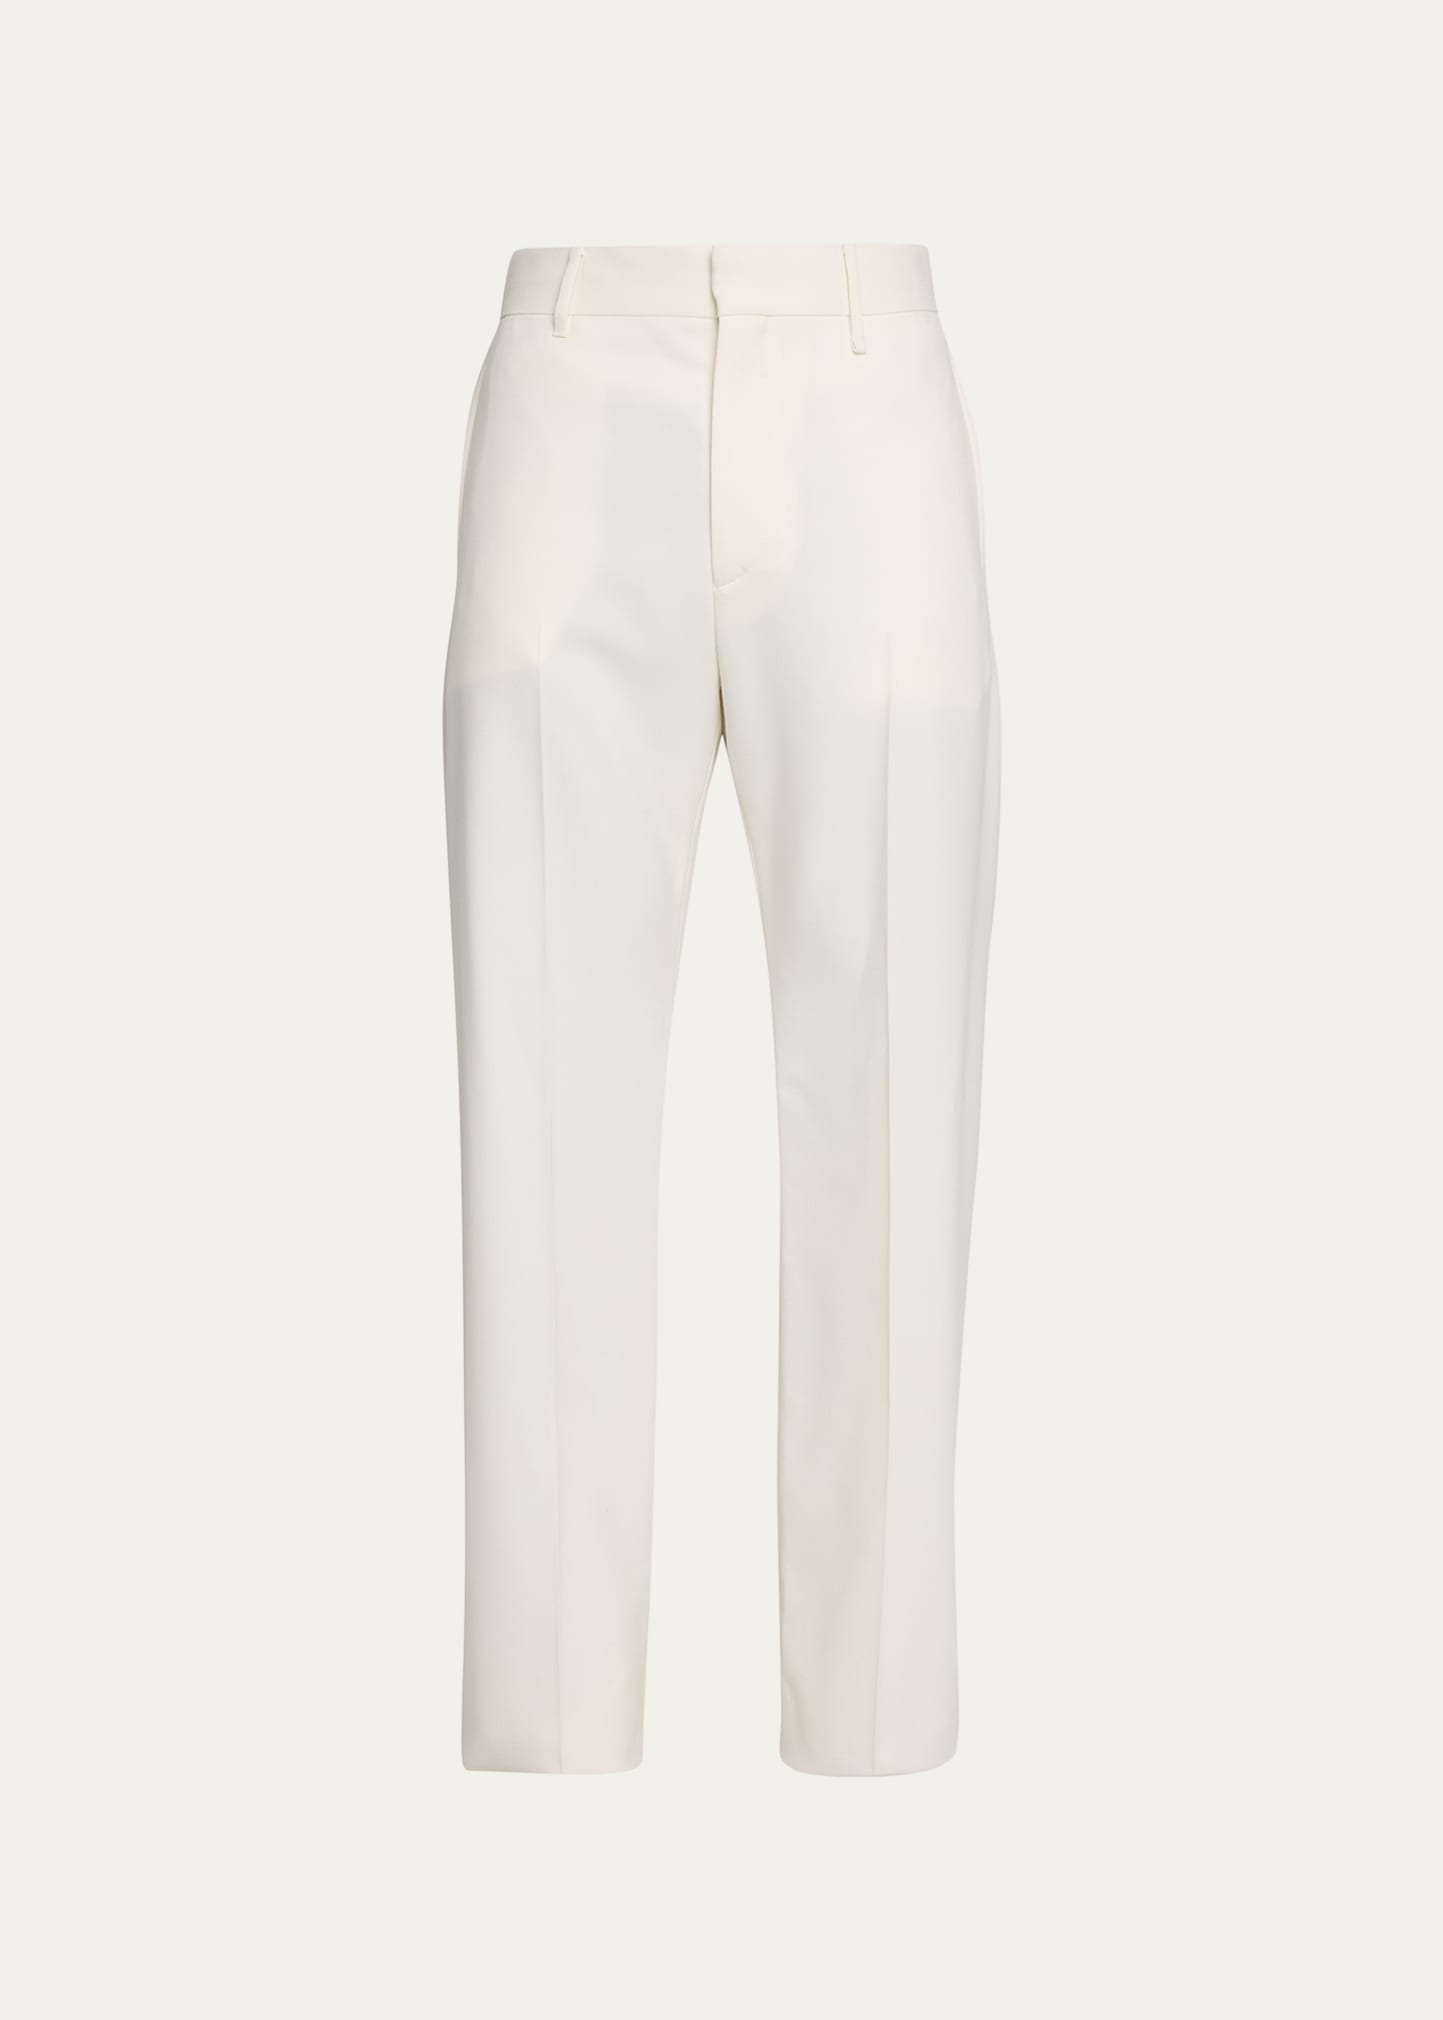 Givenchy Men's X-mas Embellished Dress Pants In White